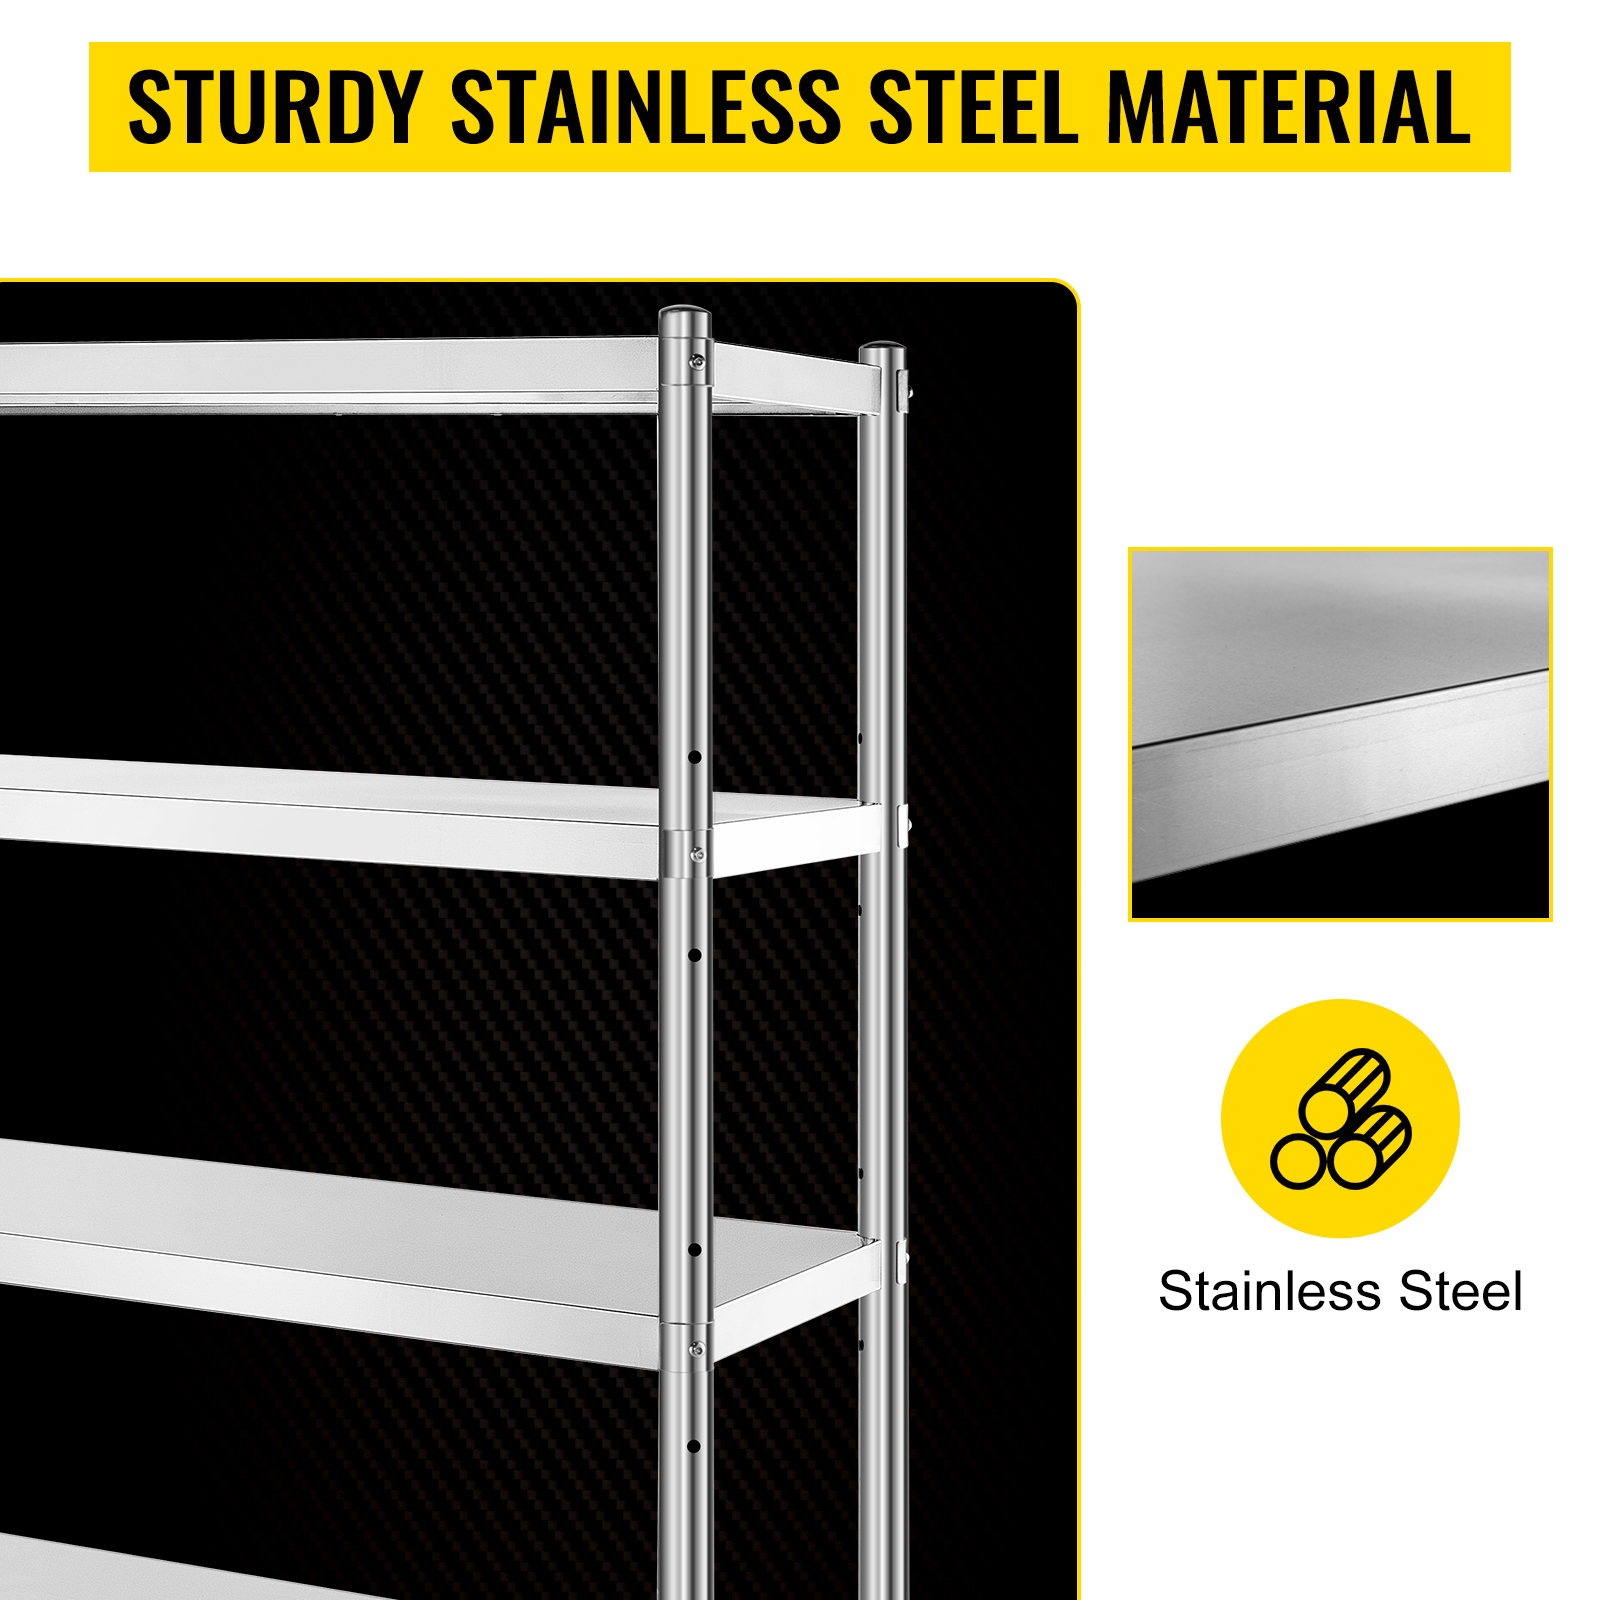 shelving unit, stainless steel, 5 tiers